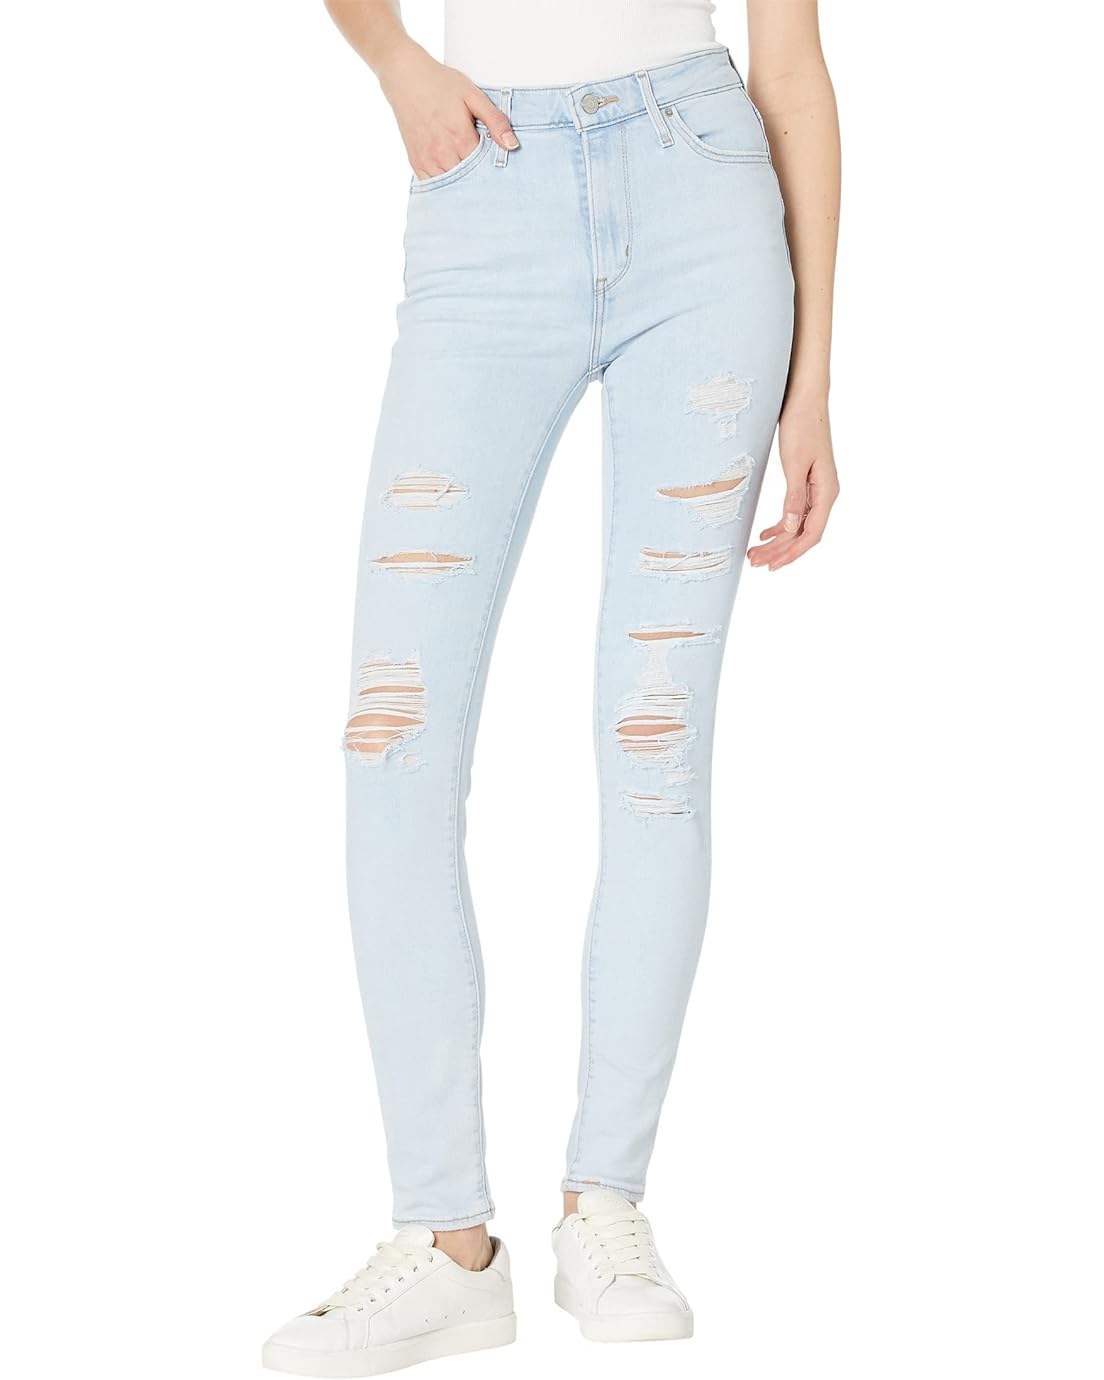 Levis Womens 721 High Rise Skinny